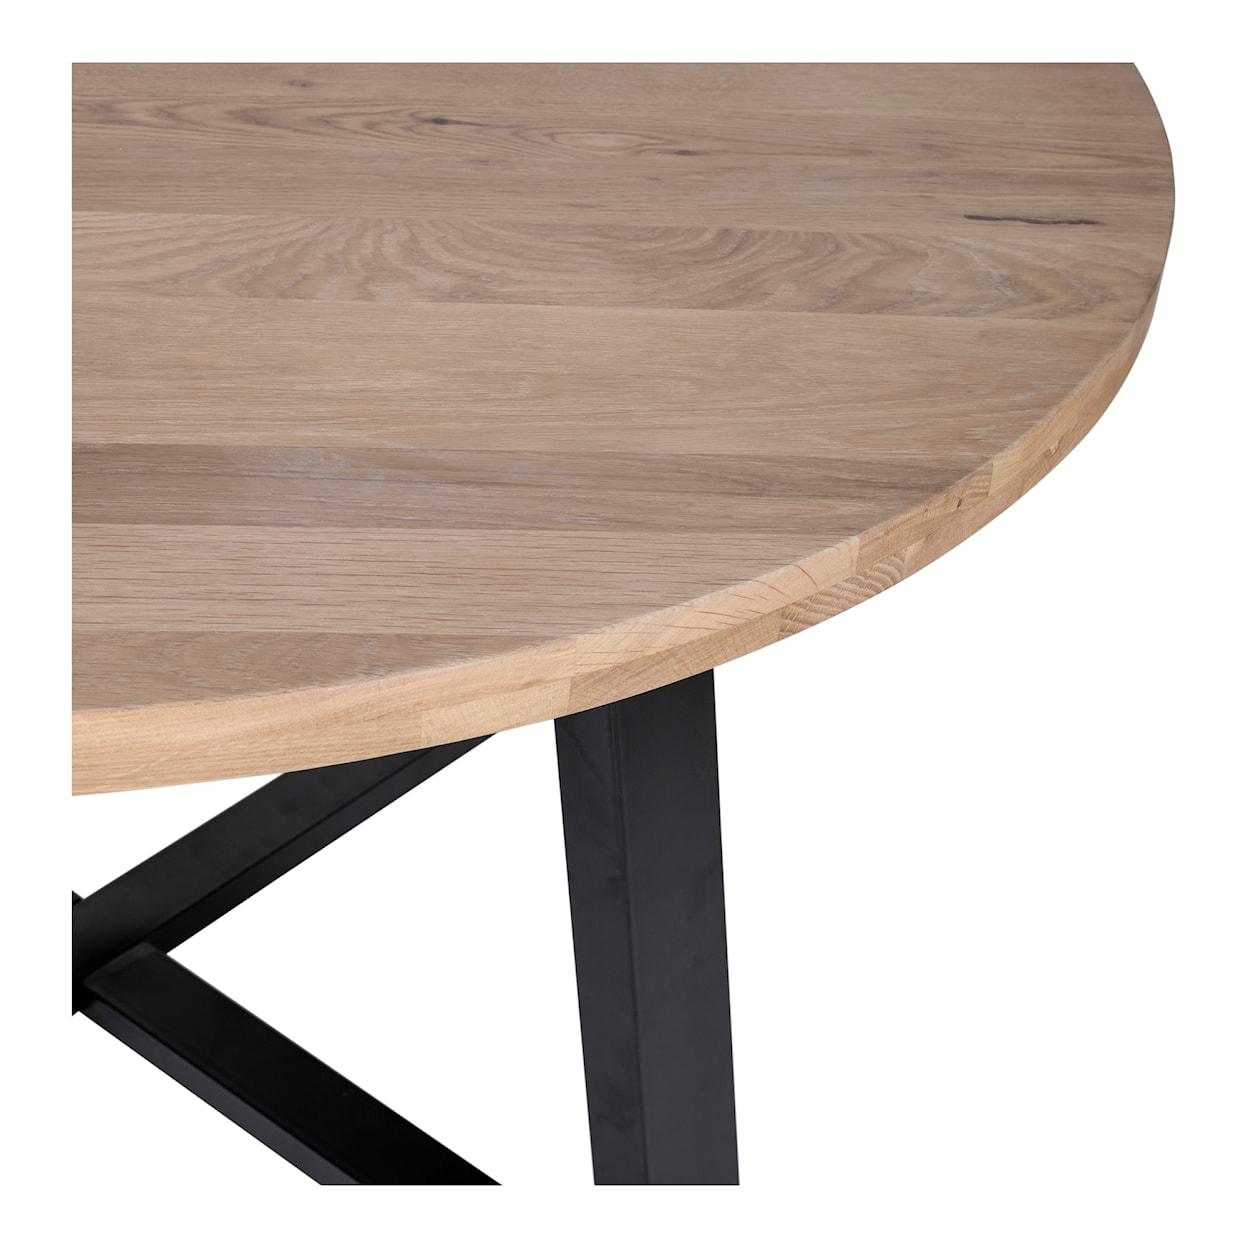 Moe's Home Collection Mila Mila Round Dining Table